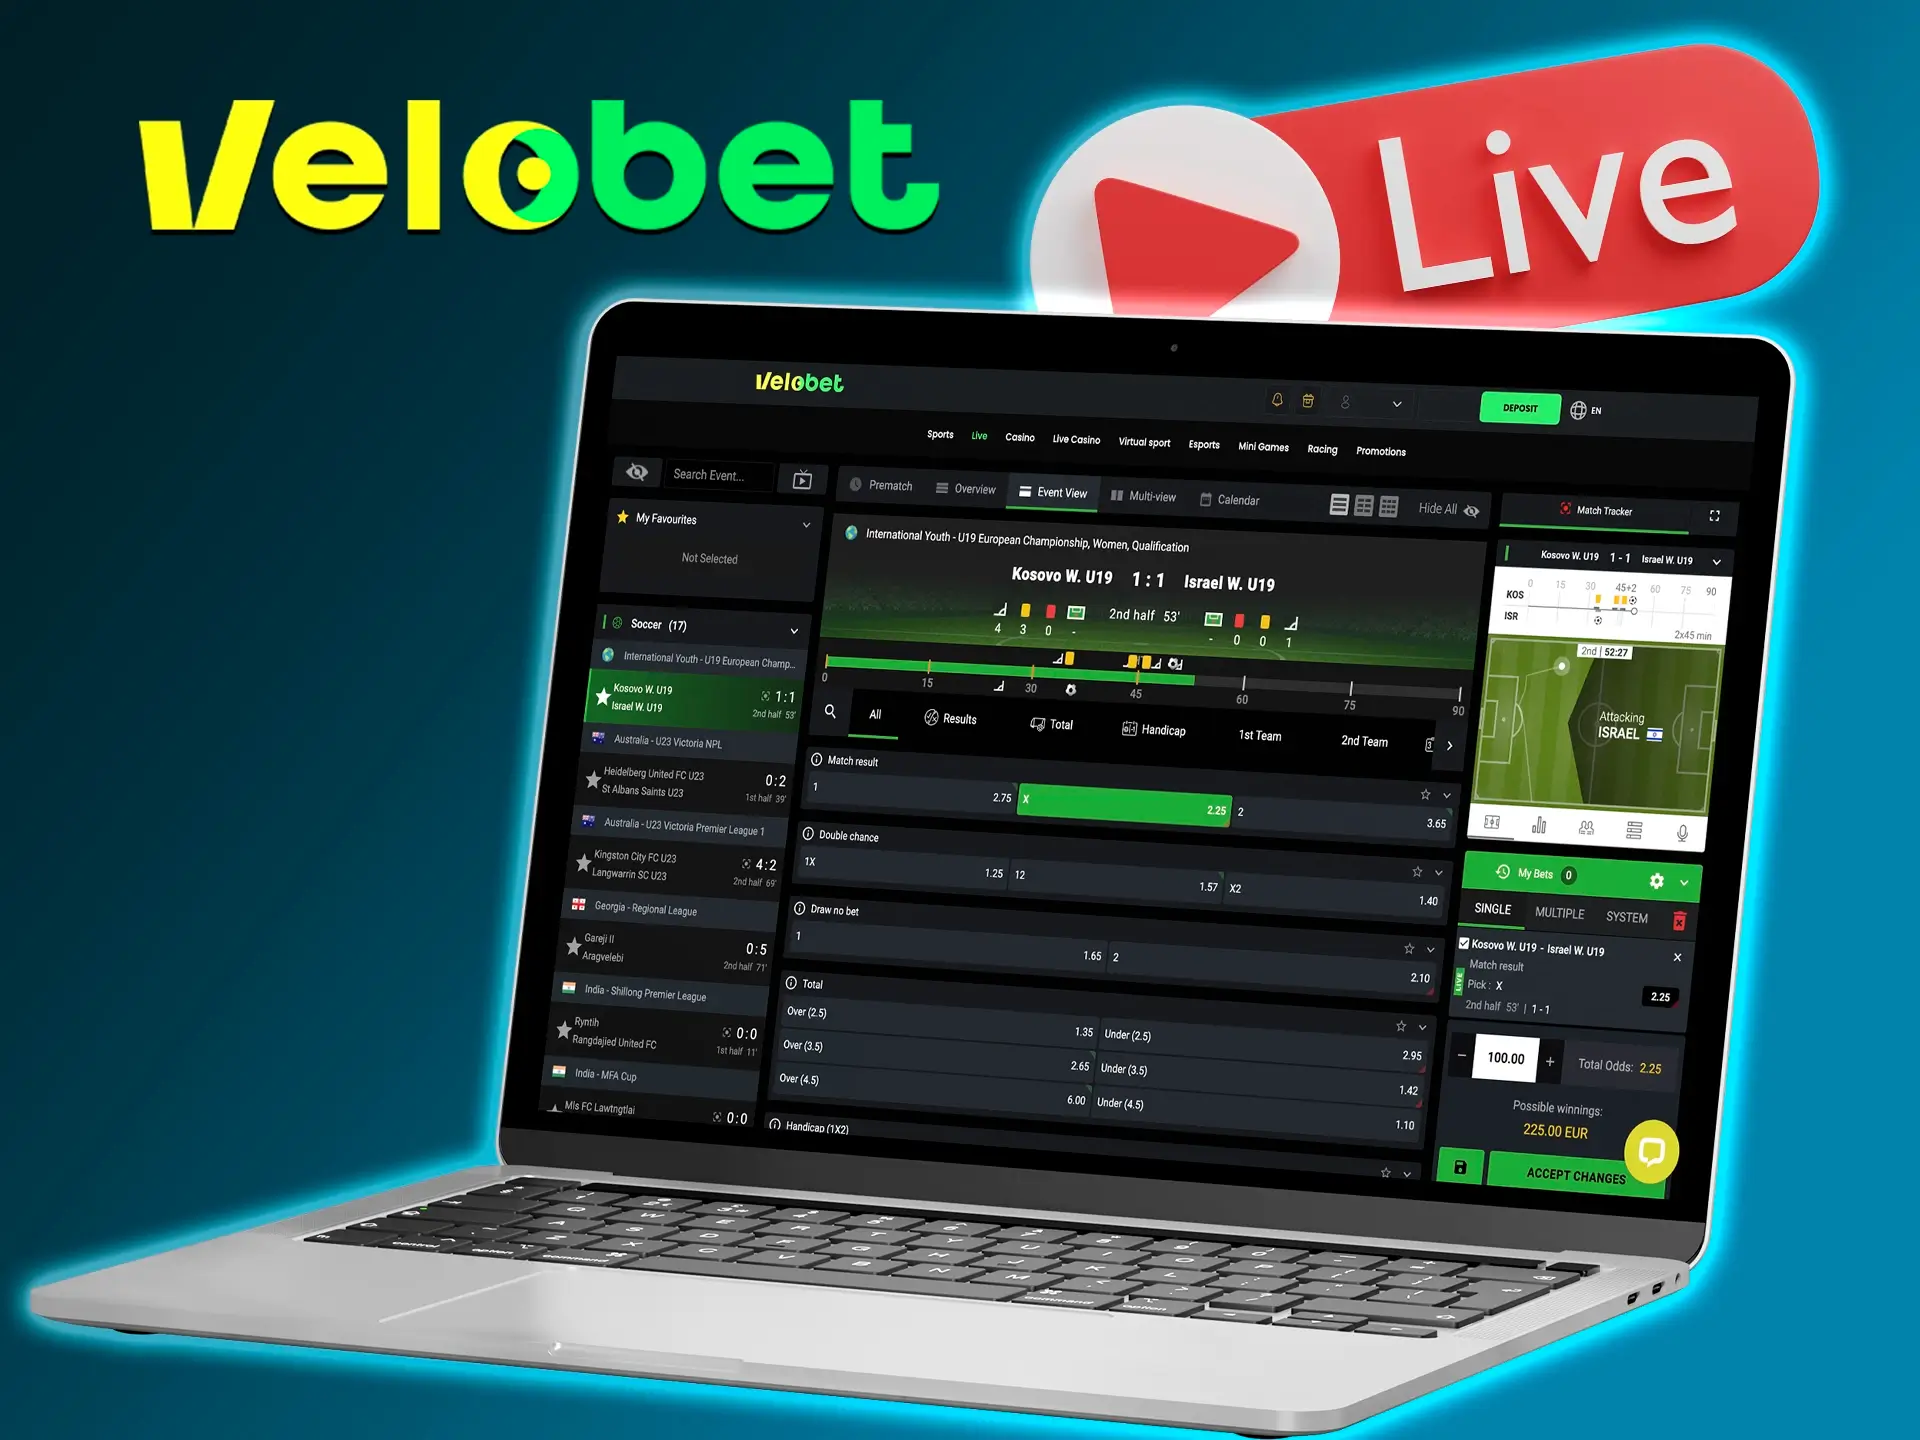 Place your bets live at Velobet and enjoy the emotion of winning.